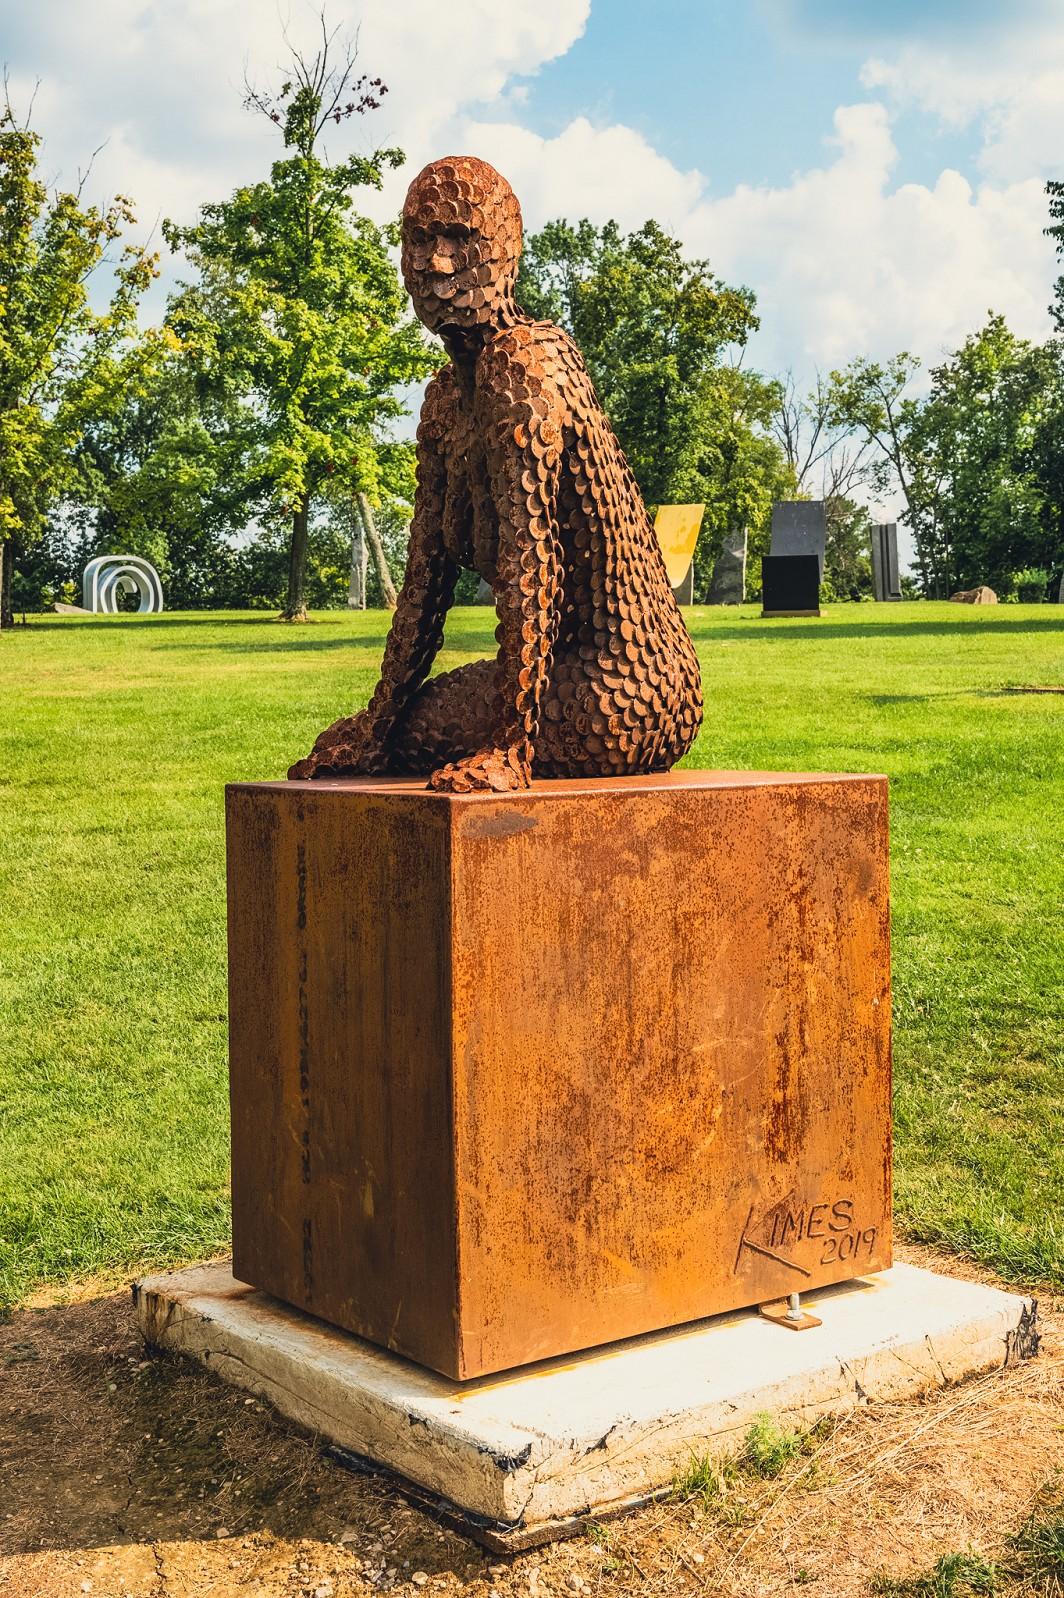 A seated female figure strikes a casual pose, body half turned in this imposing sculpture by American artist, Jason Kimes. This outdoor sculpture is made from coin-sized discs of corten steel which naturally weathers over time acquiring a beautiful